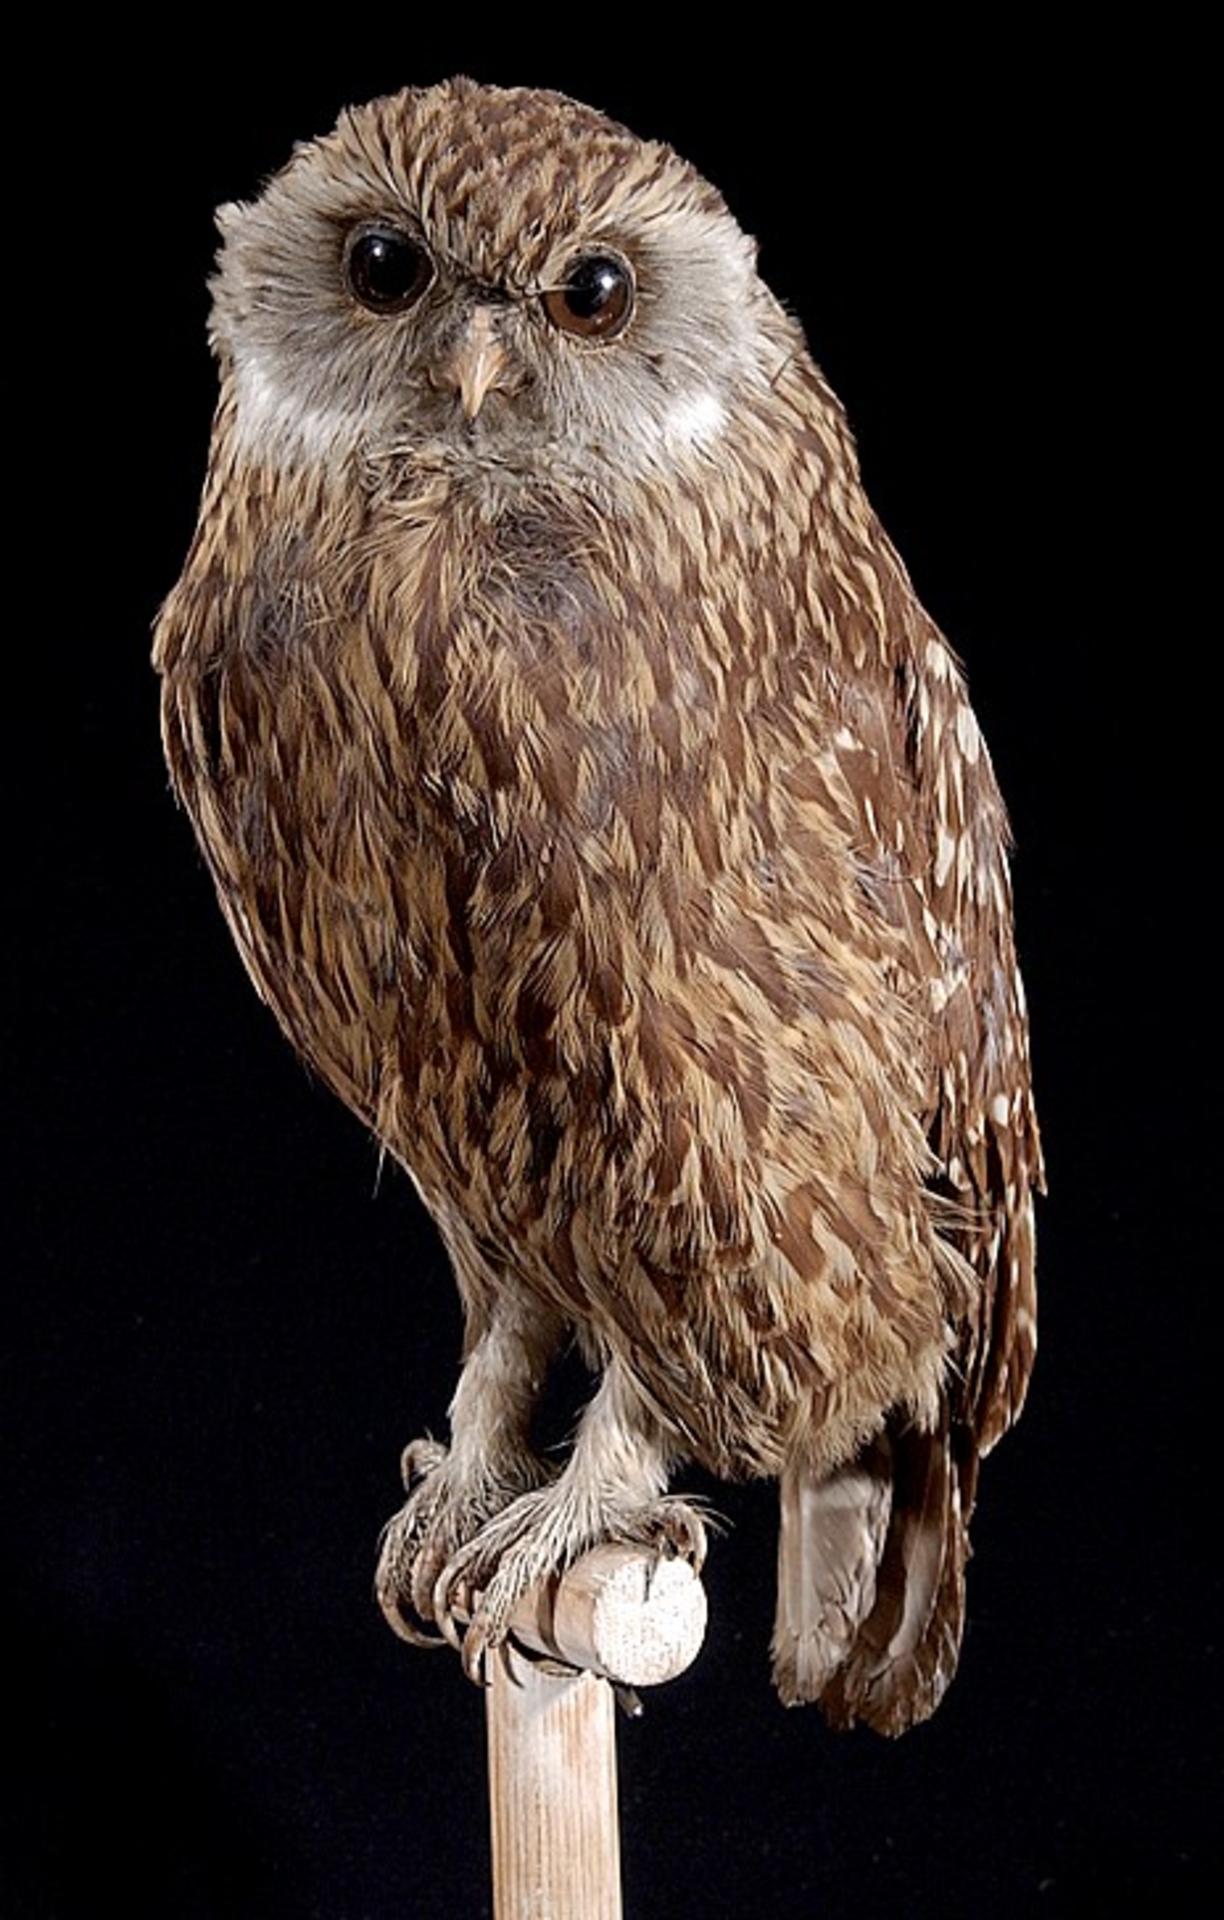 Male laughing owl 'Sceloglaux albifacies,' a brown feathered (light brown and dark brown feathers alternating) with white feathers about its eyes and on its legs and claws, mounted at Naturalis Biodiversity Centre